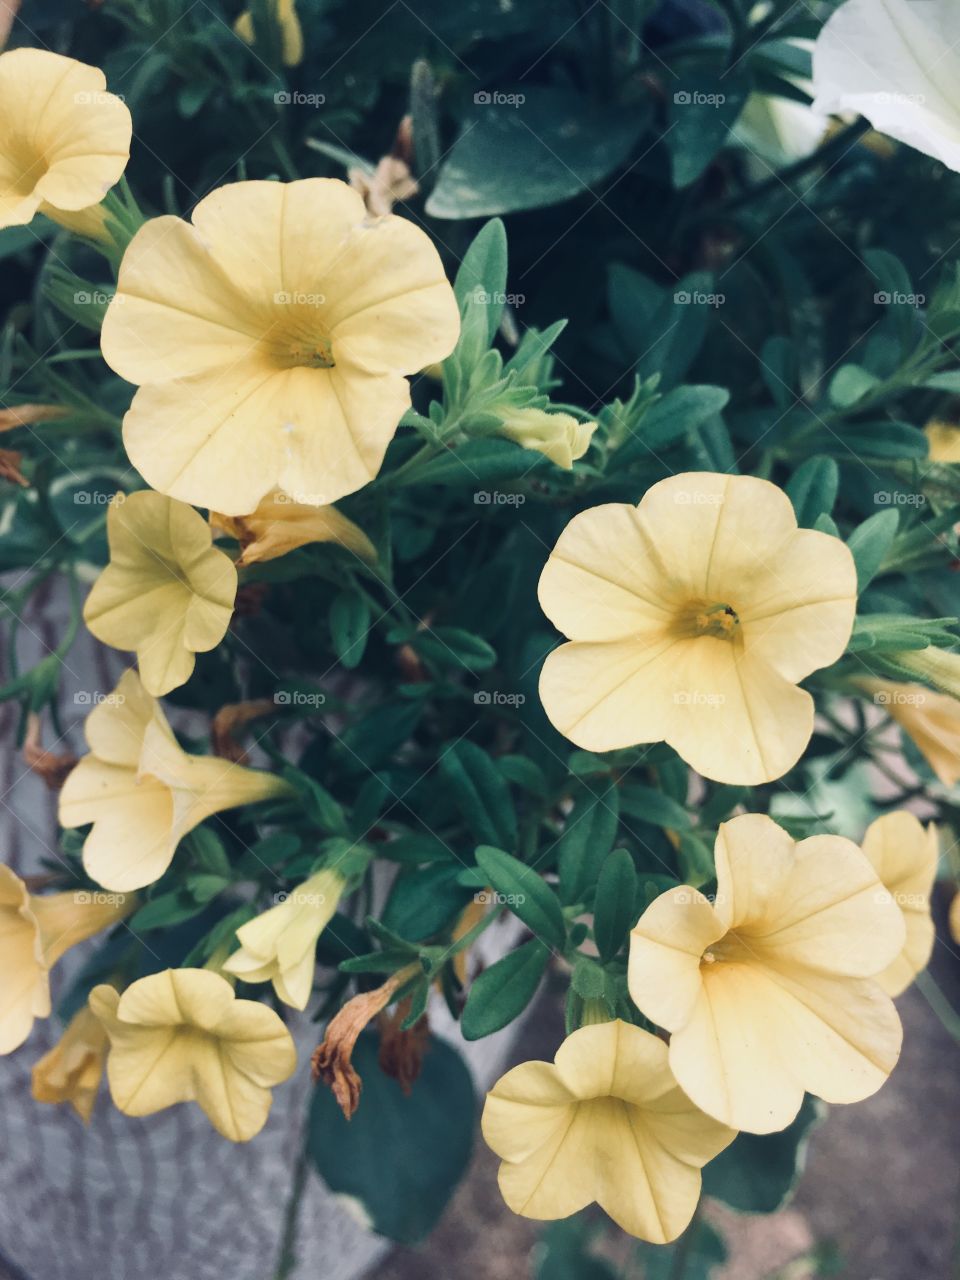 Bunch of yellow flowers